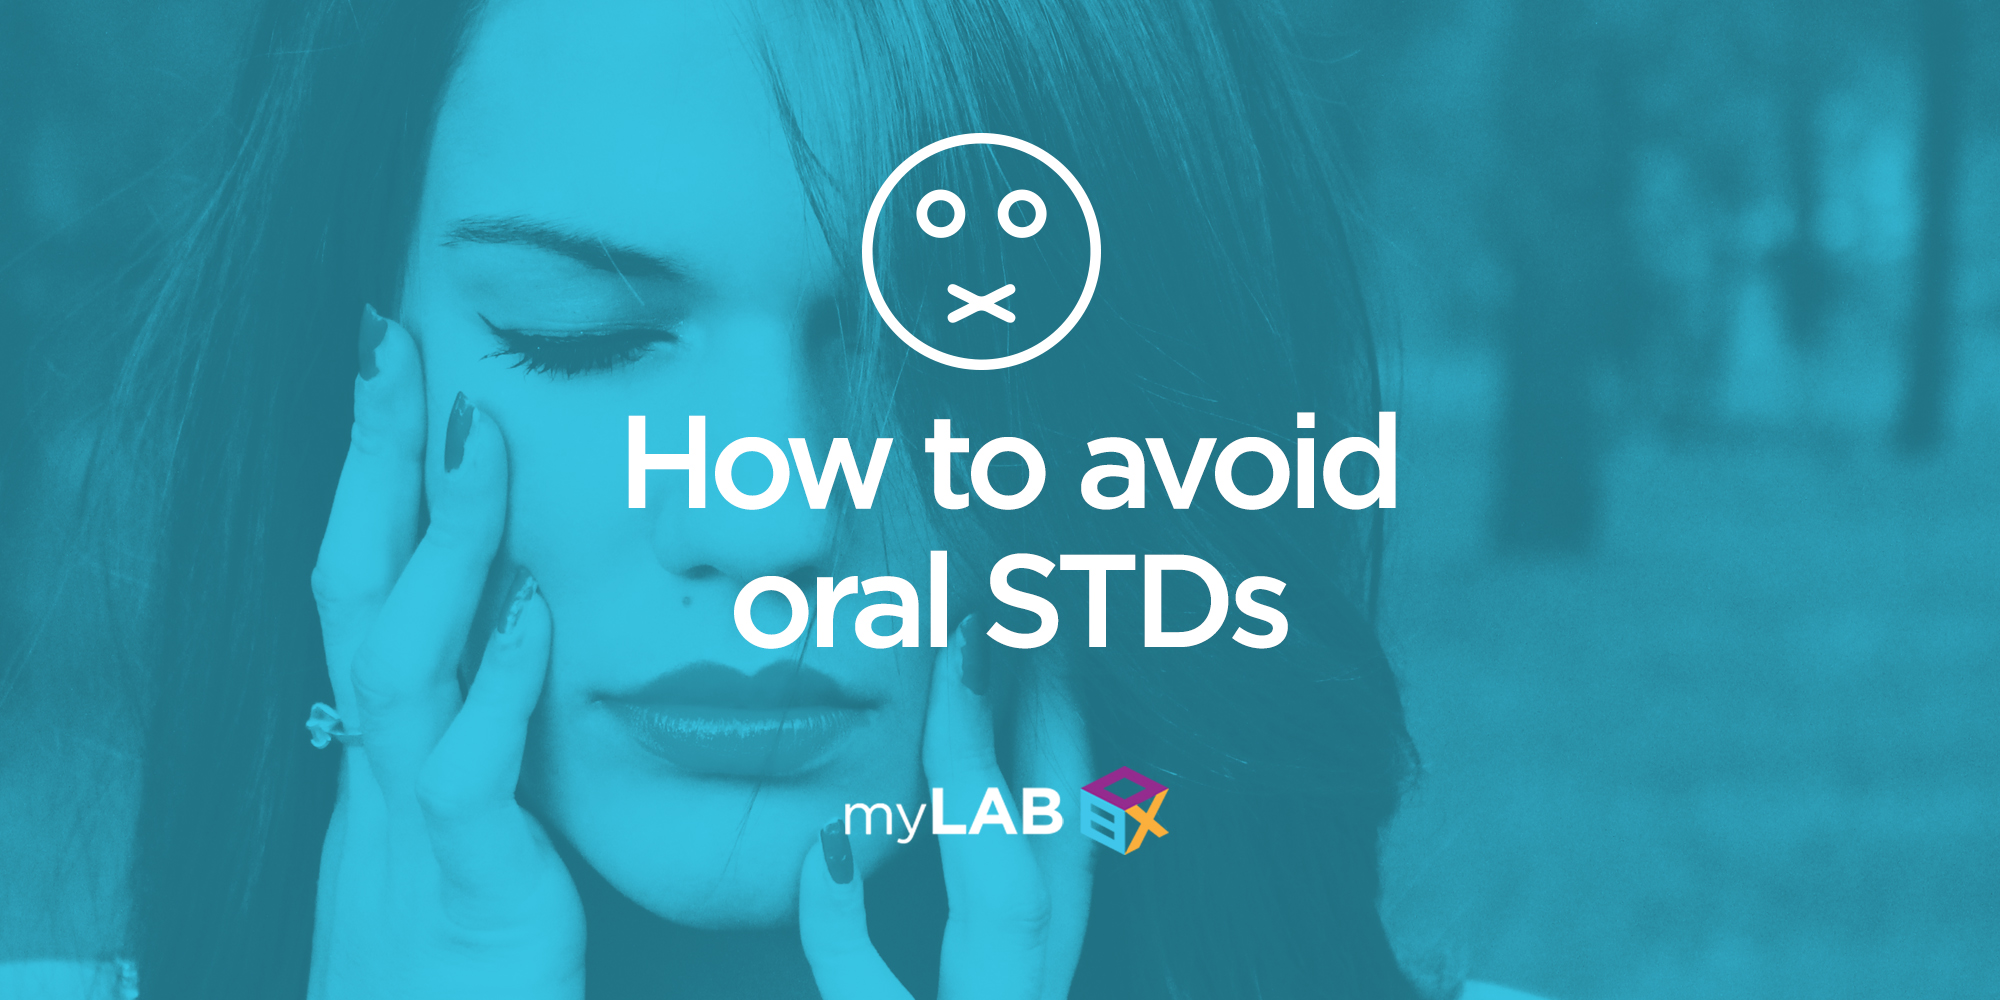 How to avoid oral STDs